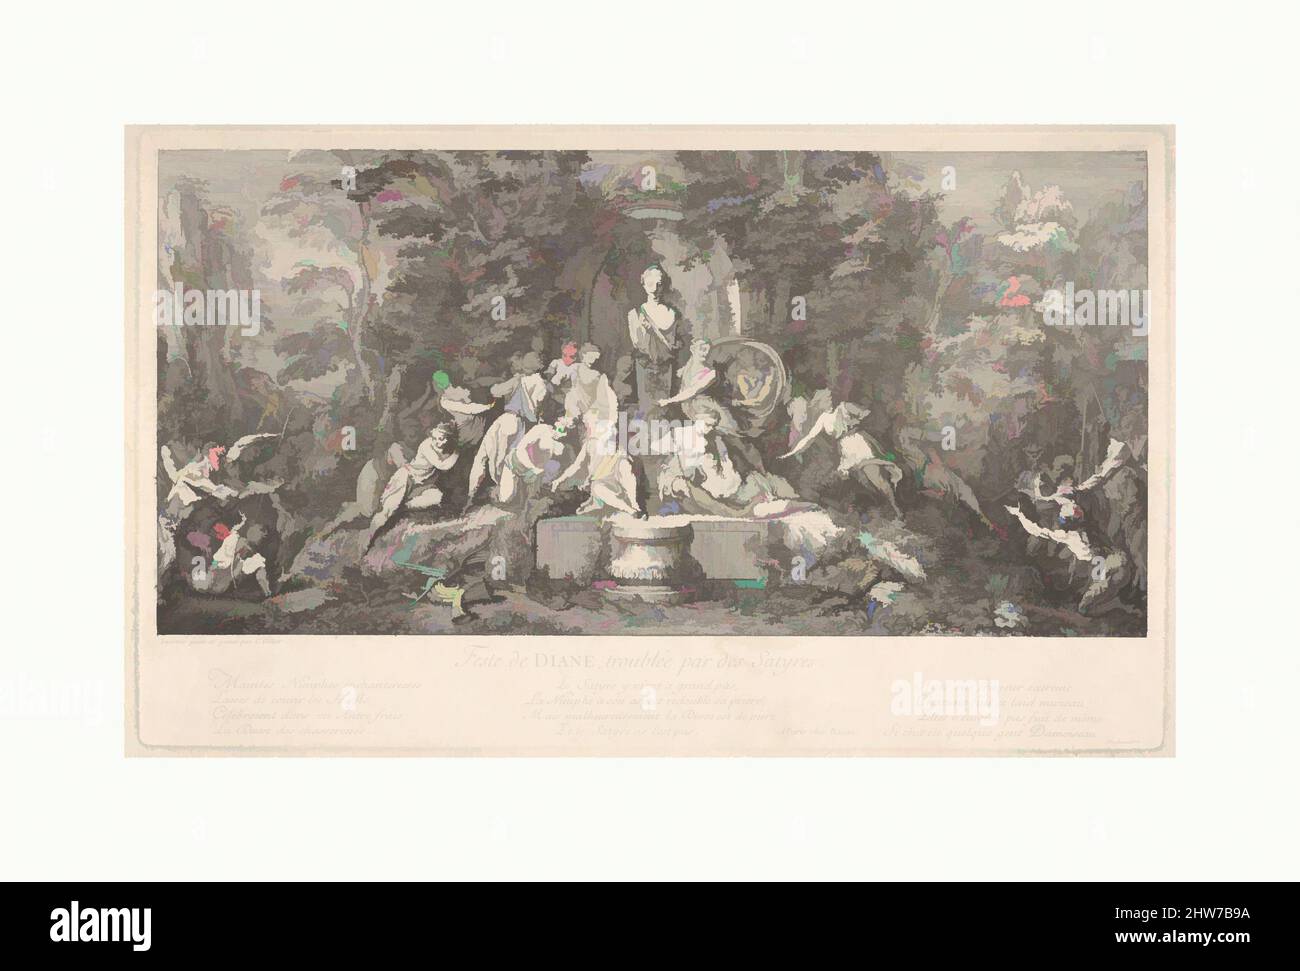 Art inspired by The festival of Diana, interrupted by satyrs (Feste de Diane, troublée par des Satyres): nymphs gathered around the bust of Diana in a stone niche at center, surprised by the arrival of satyrs from either side, from 'Les Bacchanales; Quatres Festes', ca. 1786, Etching, Classic works modernized by Artotop with a splash of modernity. Shapes, color and value, eye-catching visual impact on art. Emotions through freedom of artworks in a contemporary way. A timeless message pursuing a wildly creative new direction. Artists turning to the digital medium and creating the Artotop NFT Stock Photo